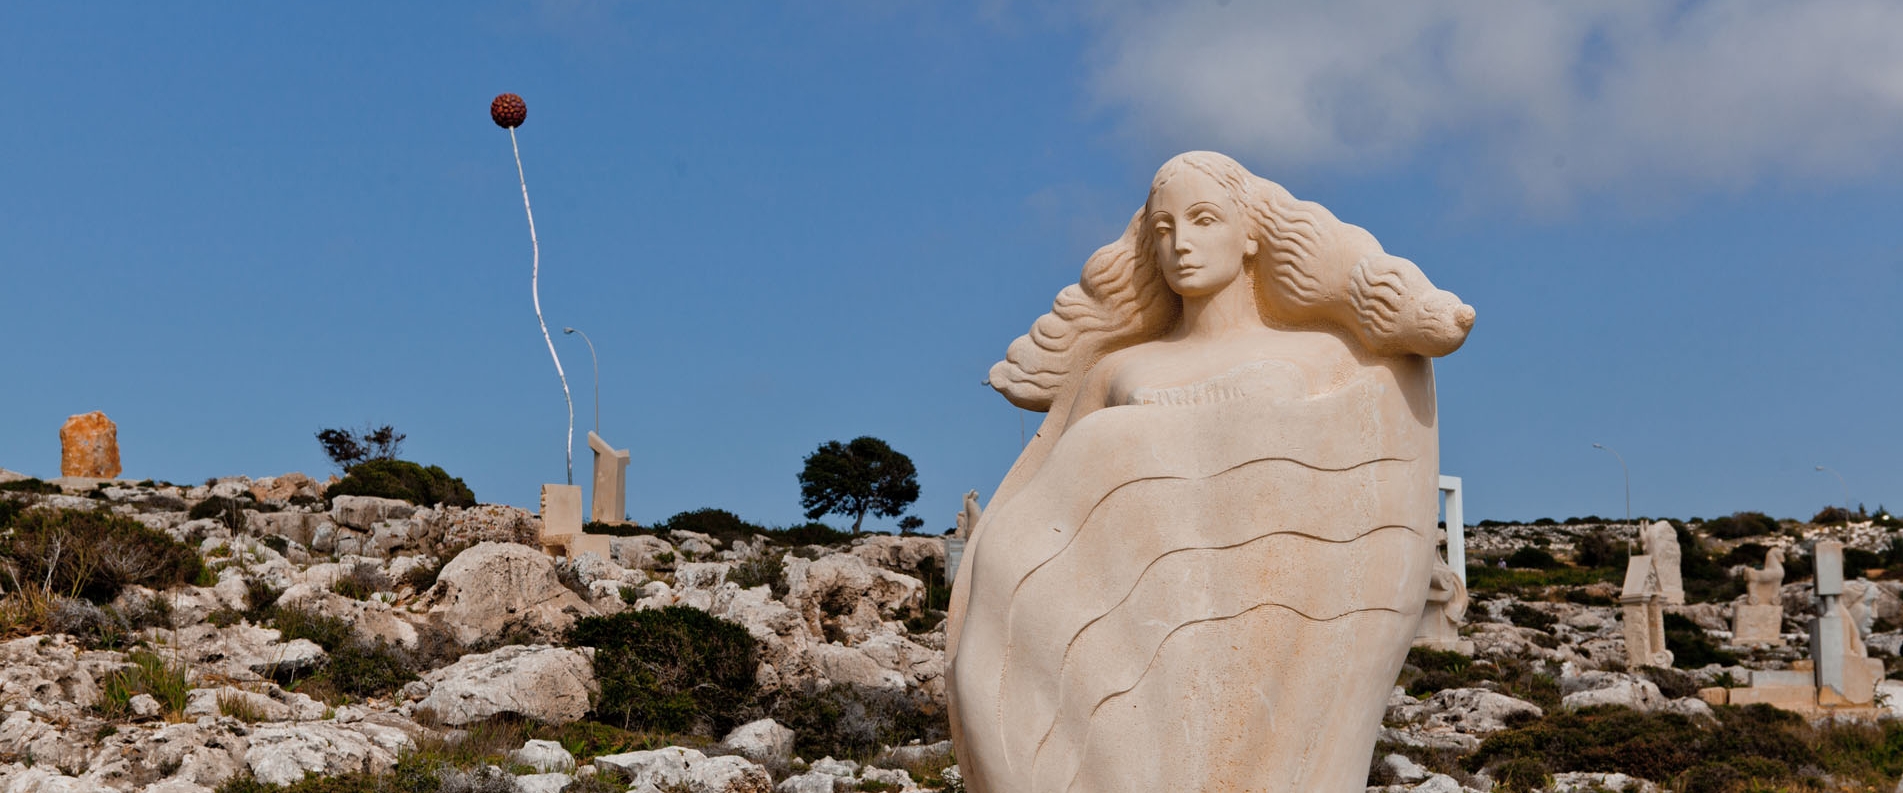 Where to go for a stroll in Ayia Napa: The Sculpture Park